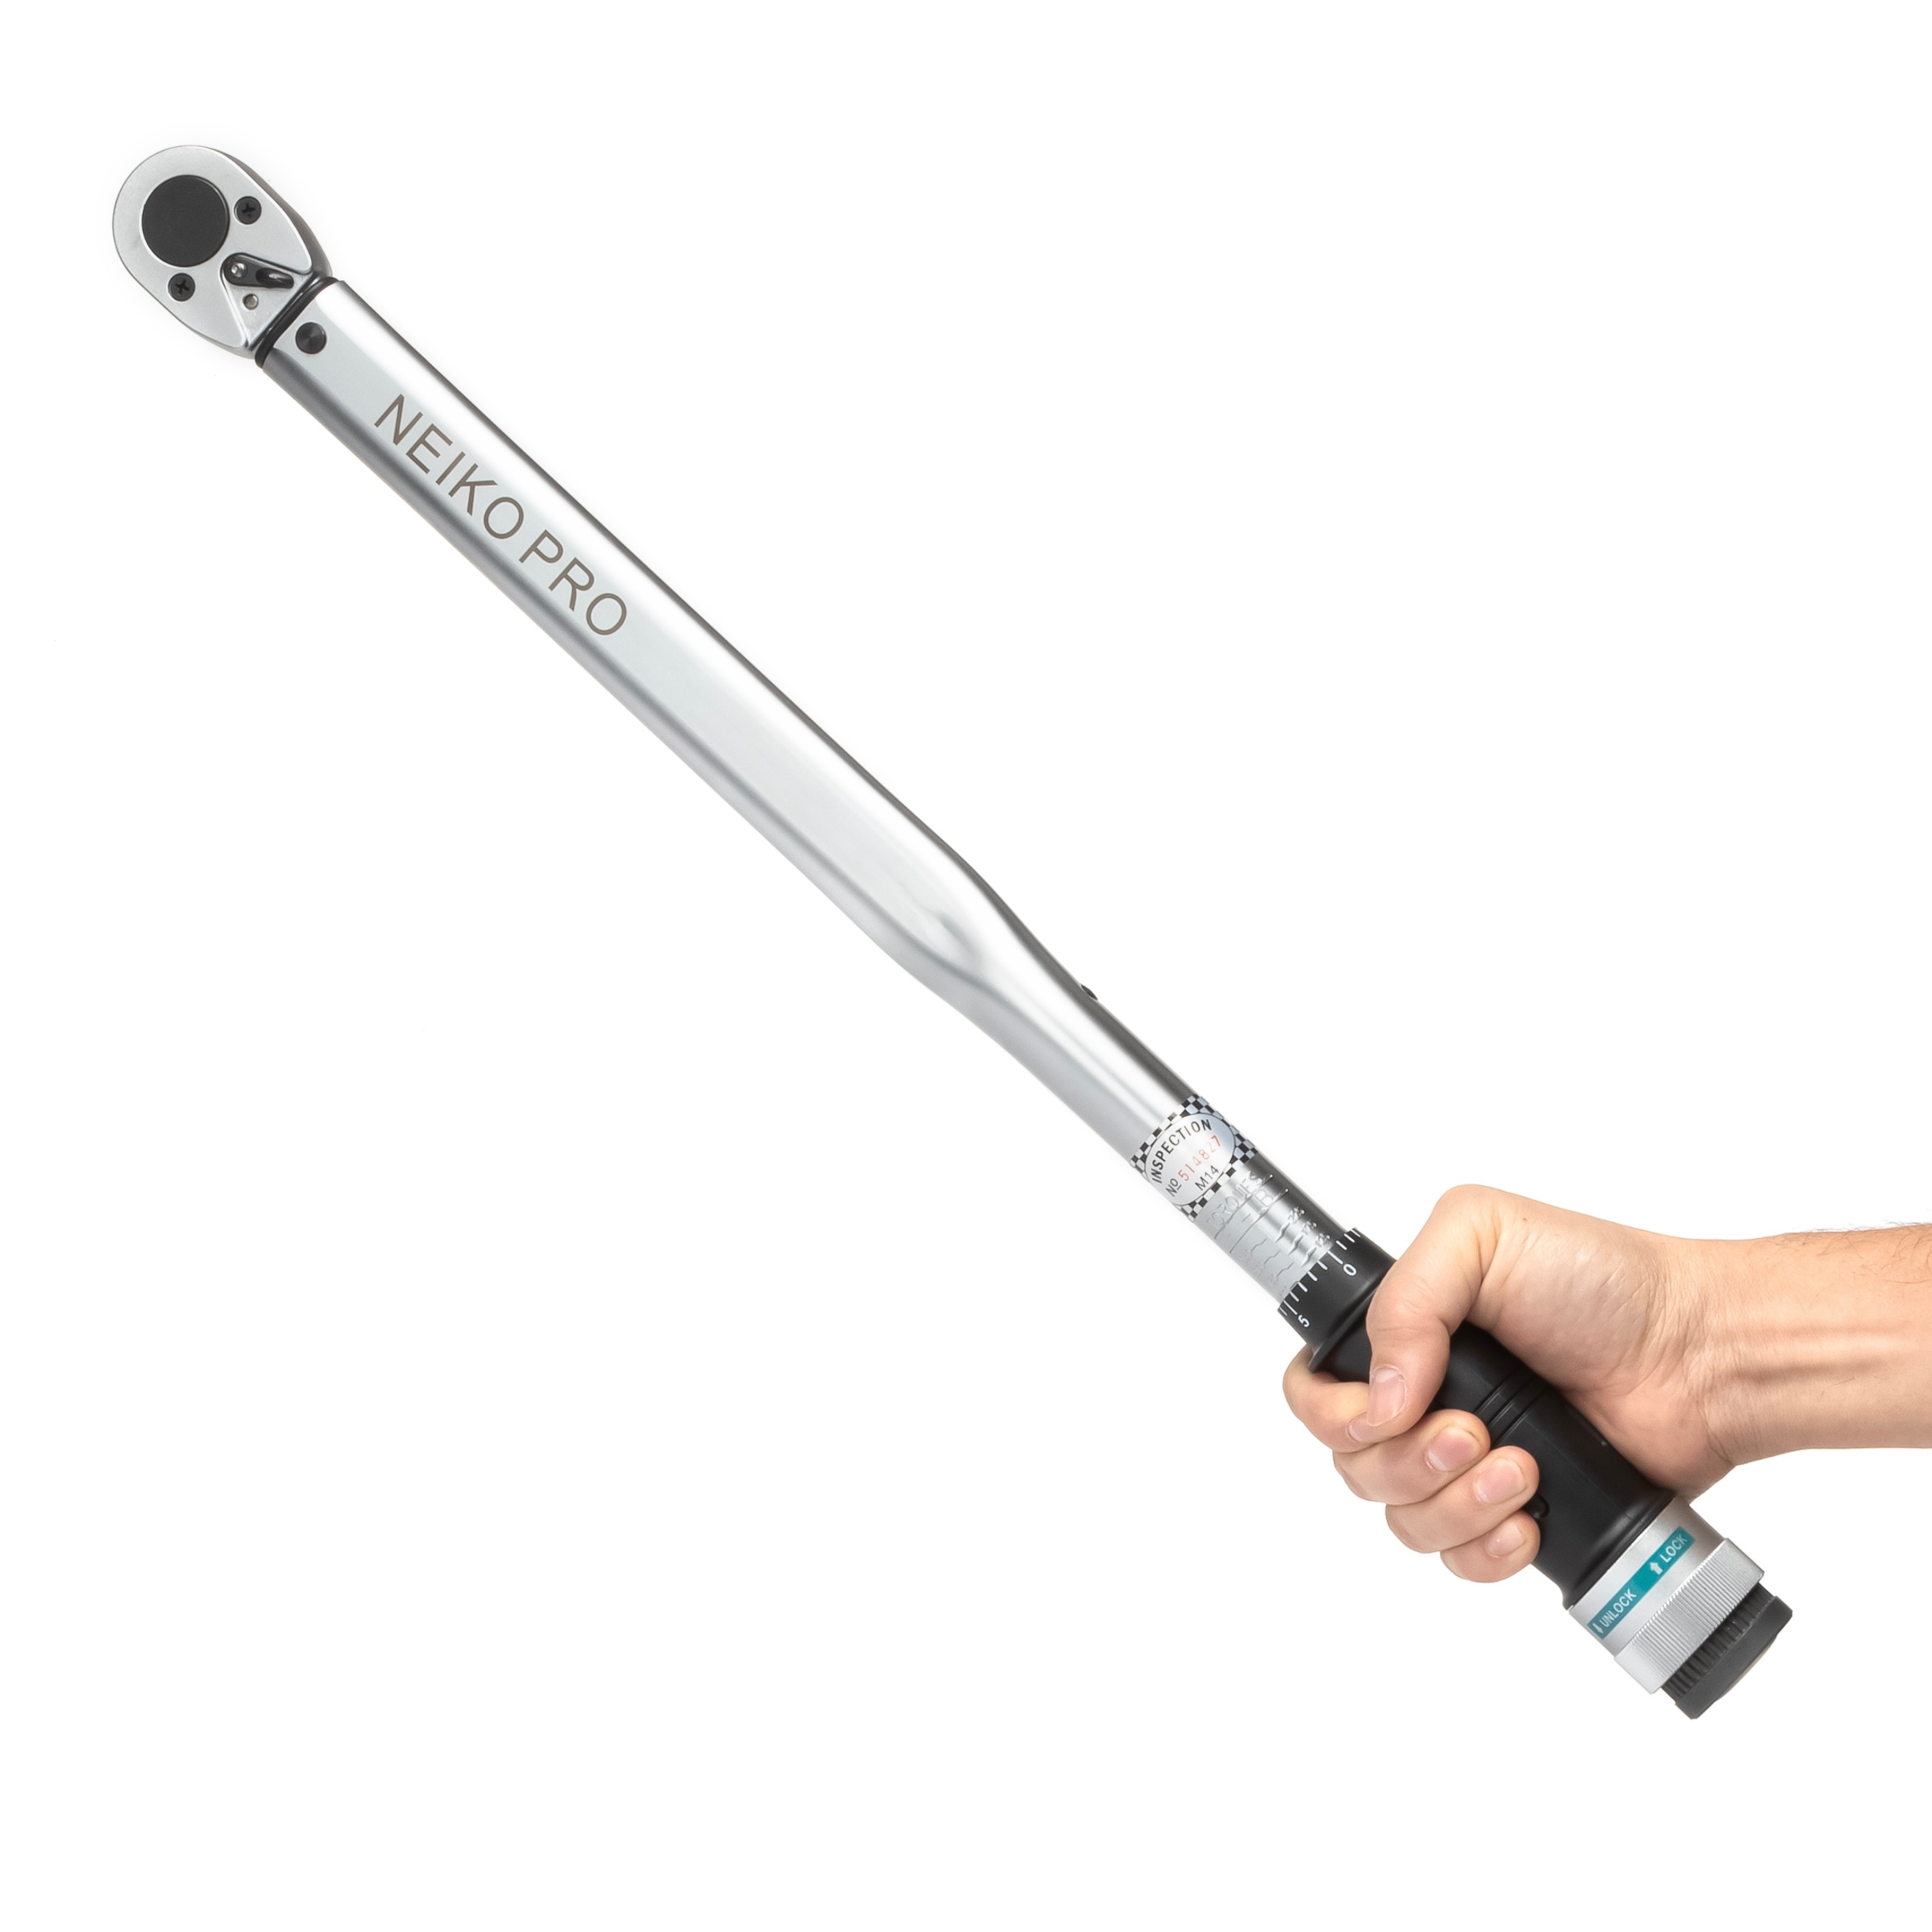 NEIKO 1/2-in Drive Click Torque Wrench (50-ft lb to 250-ft lb) in